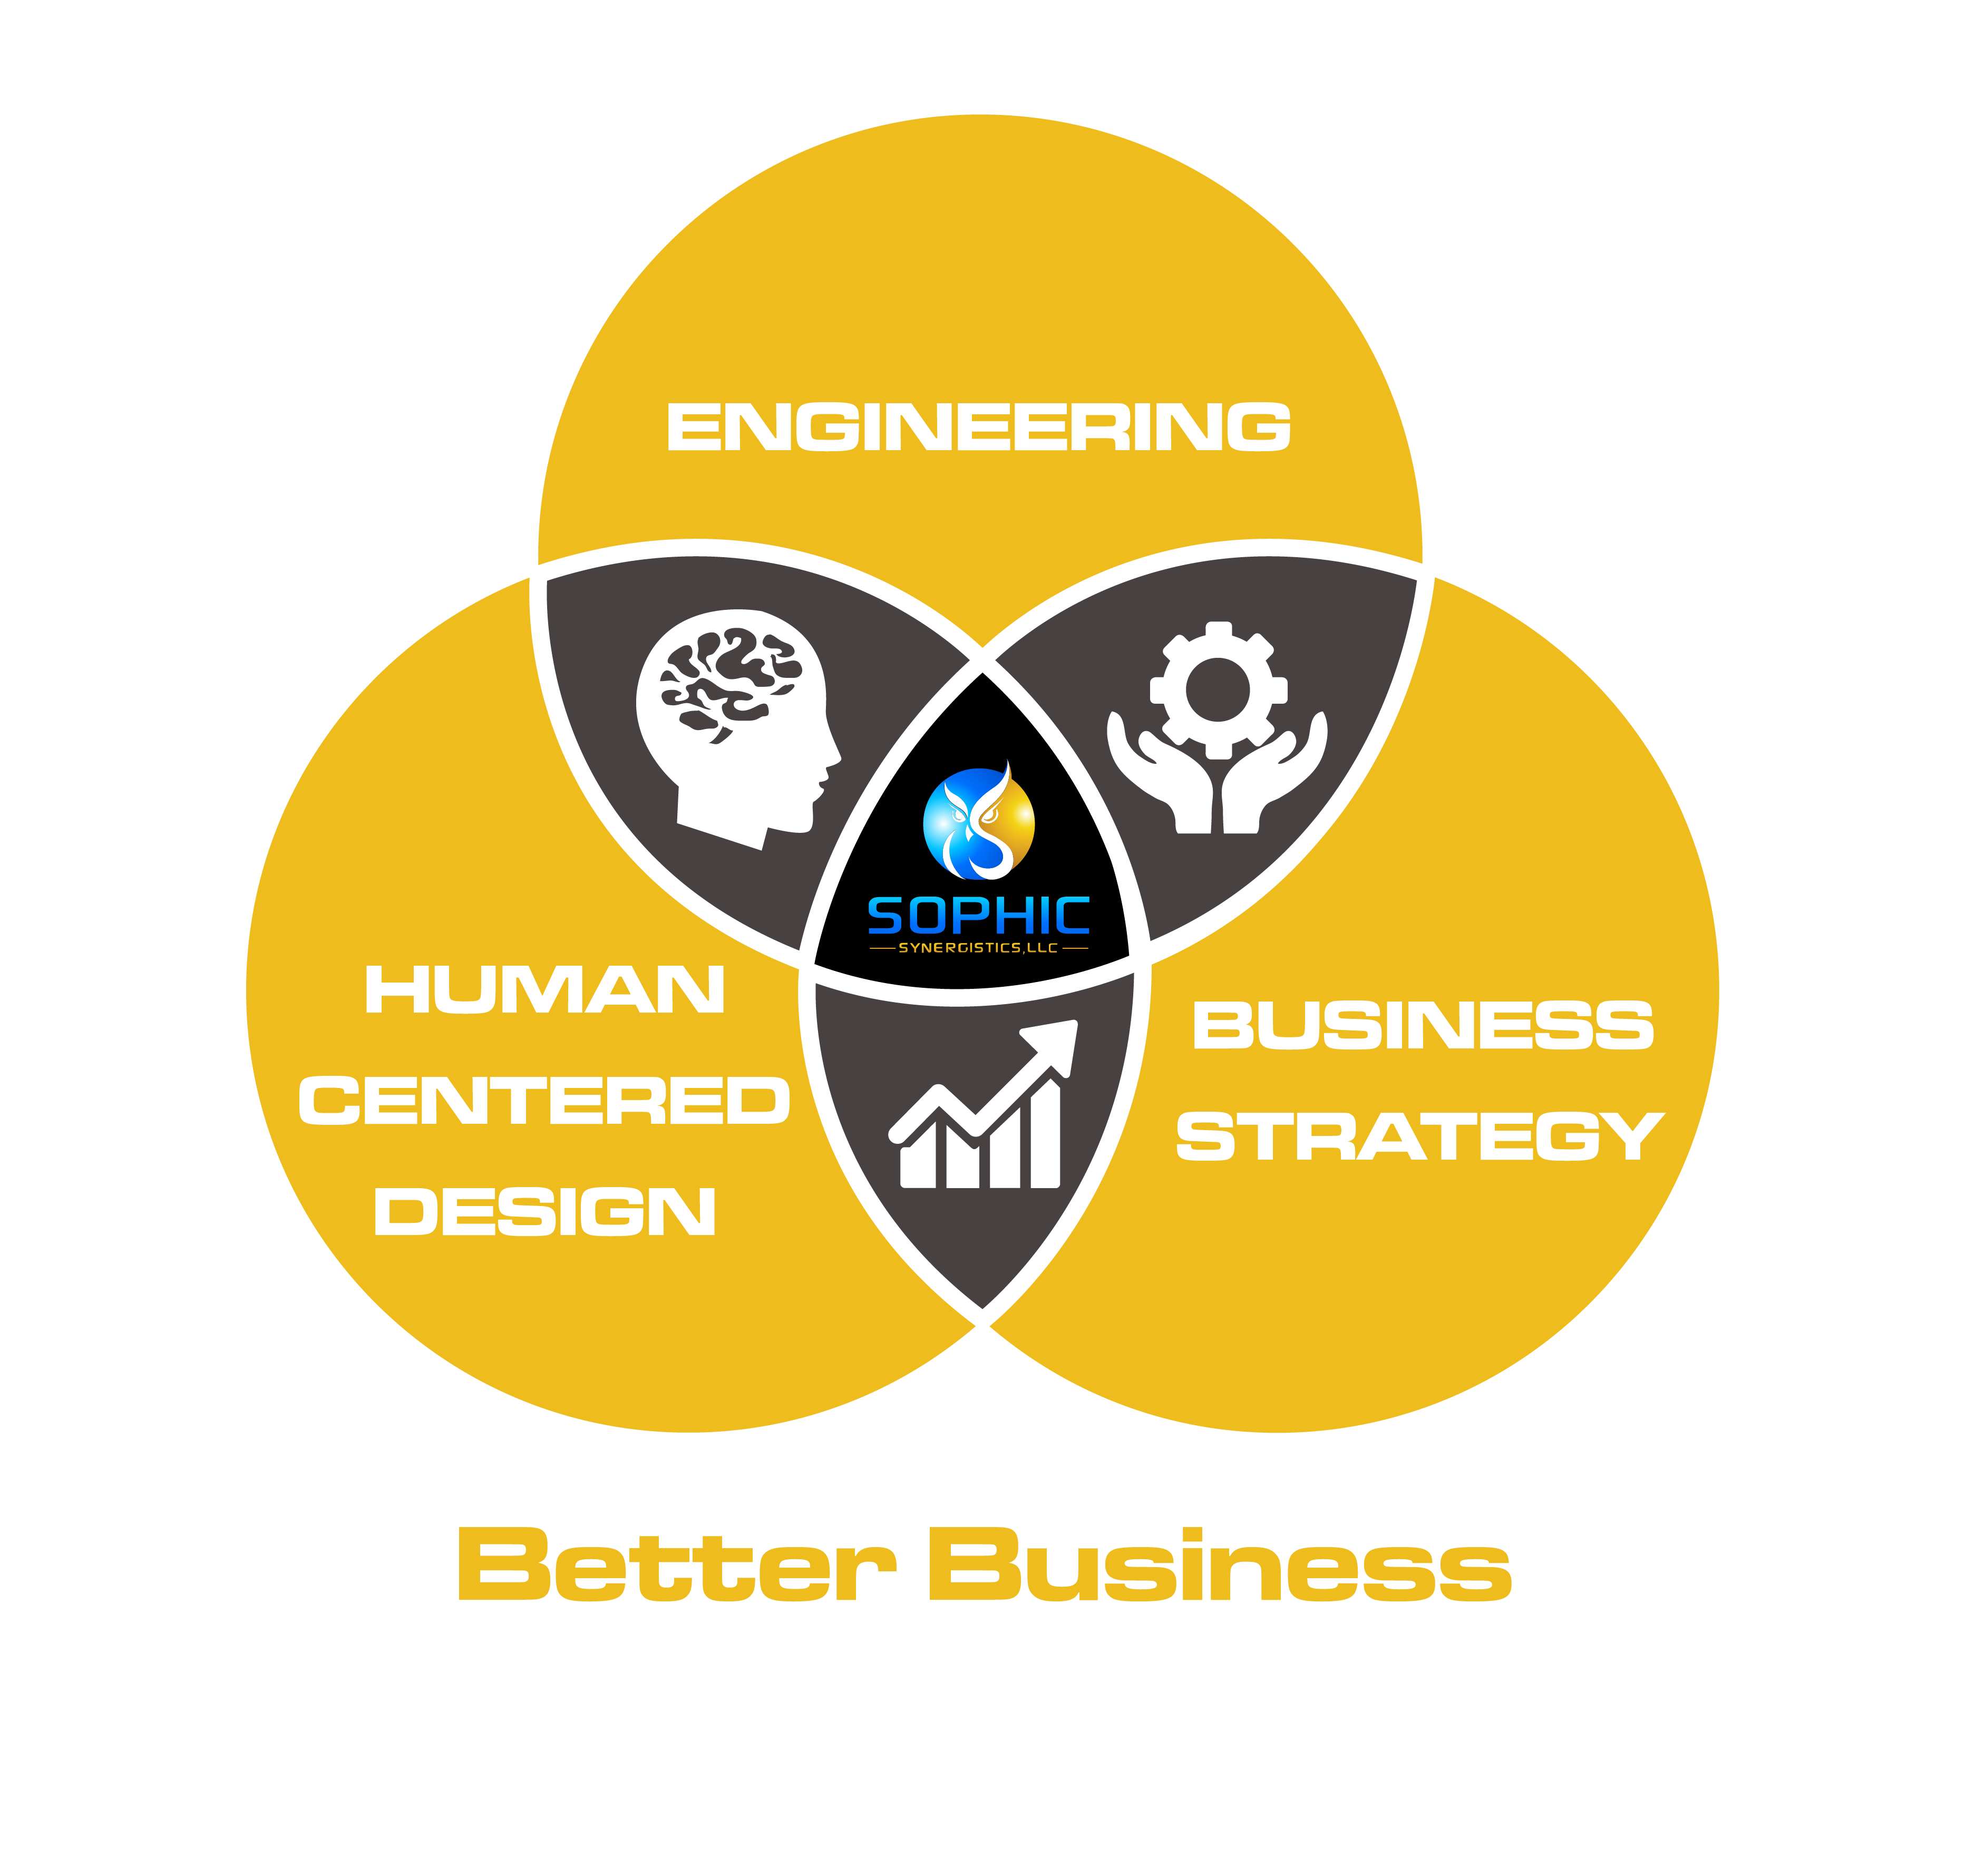 Engineering, Human-Centered Design, and Business Strategy combine to make Better Business by Design